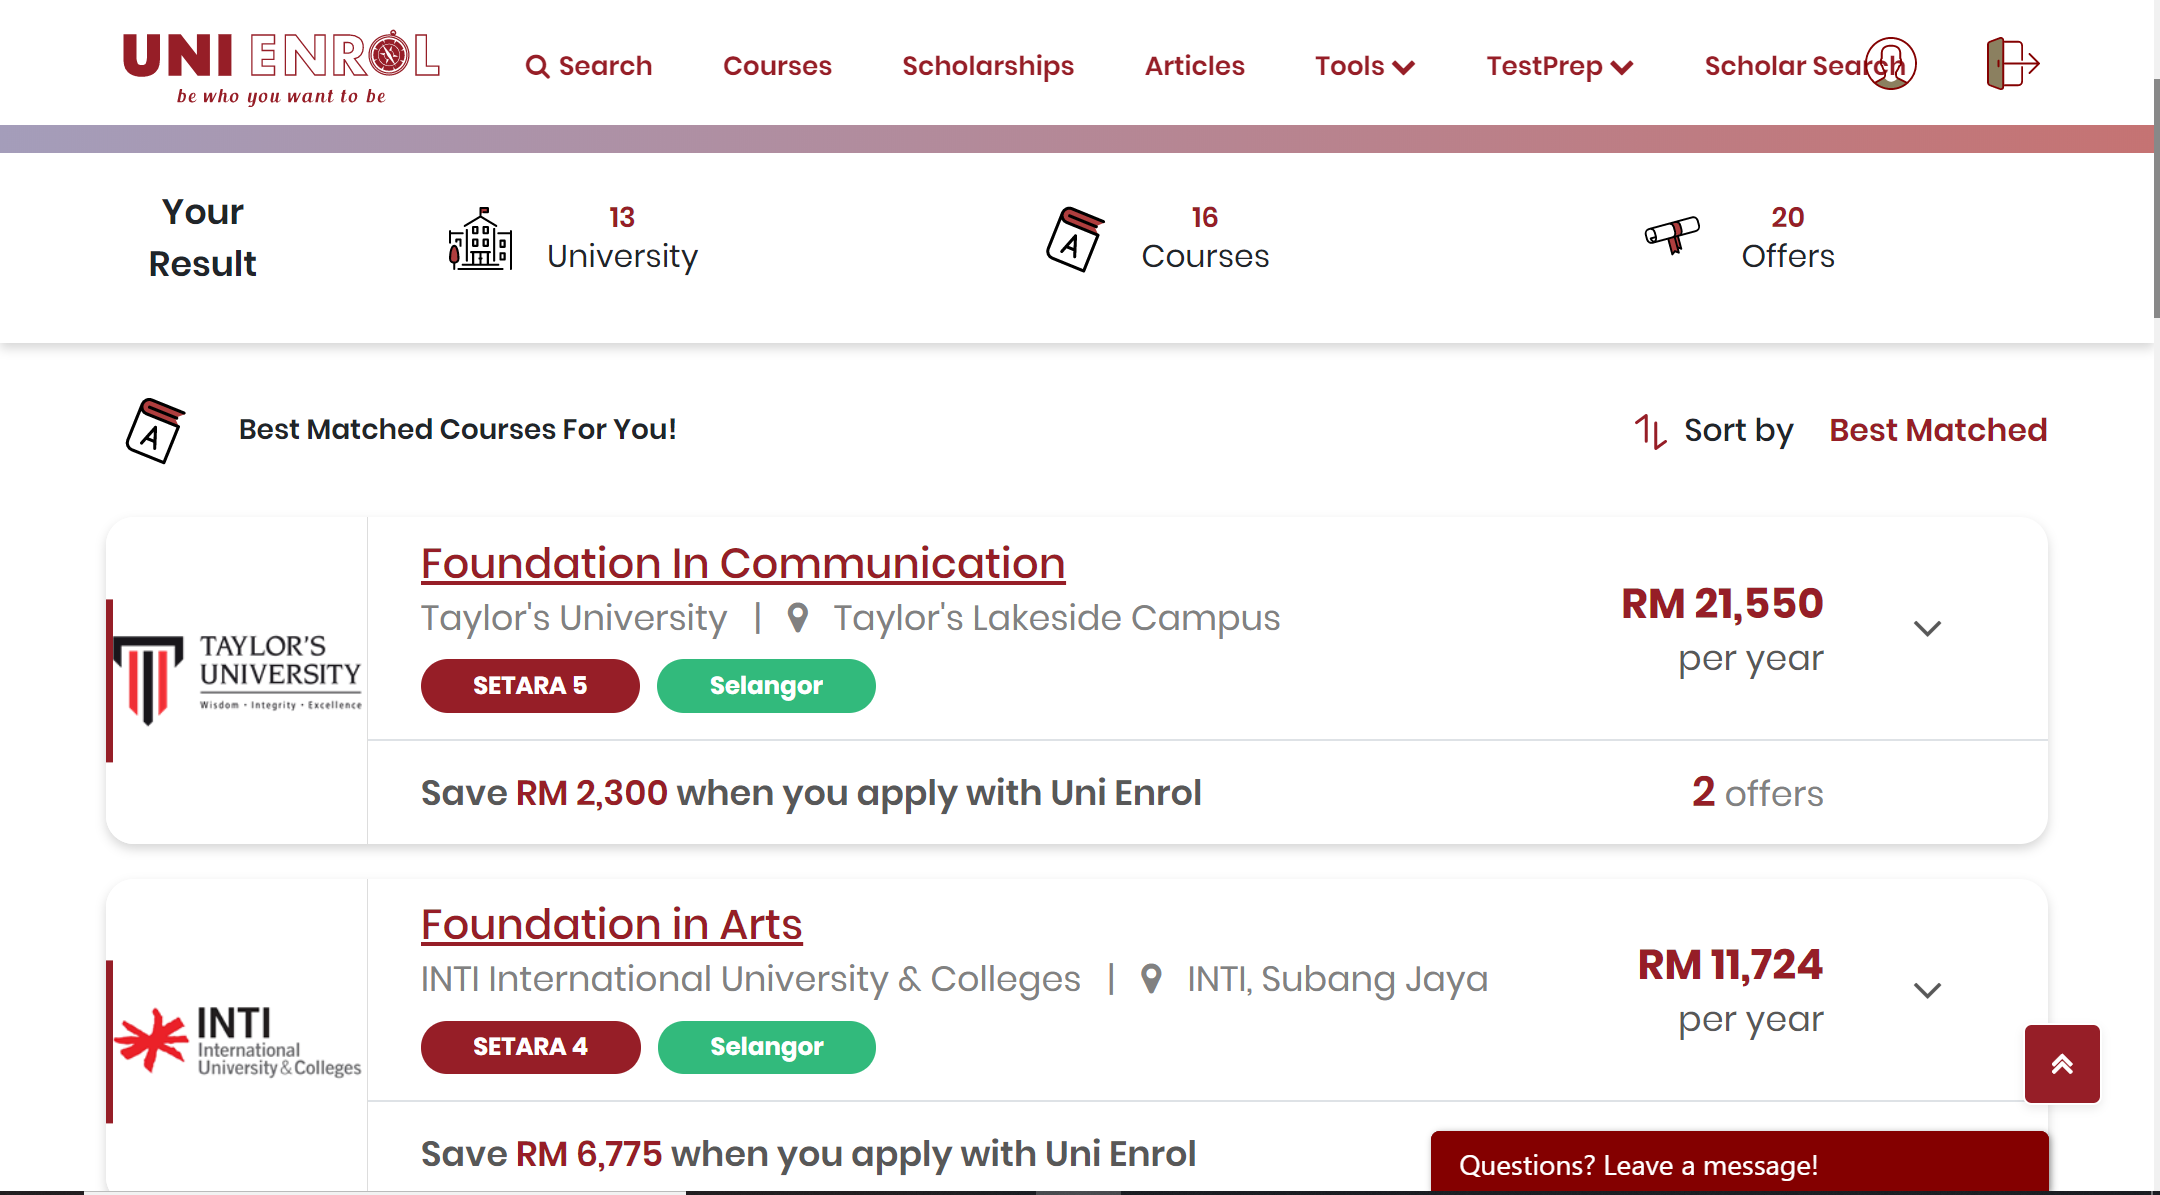 Pathway Match helps you save time finding the right university and allows you to compare prices.